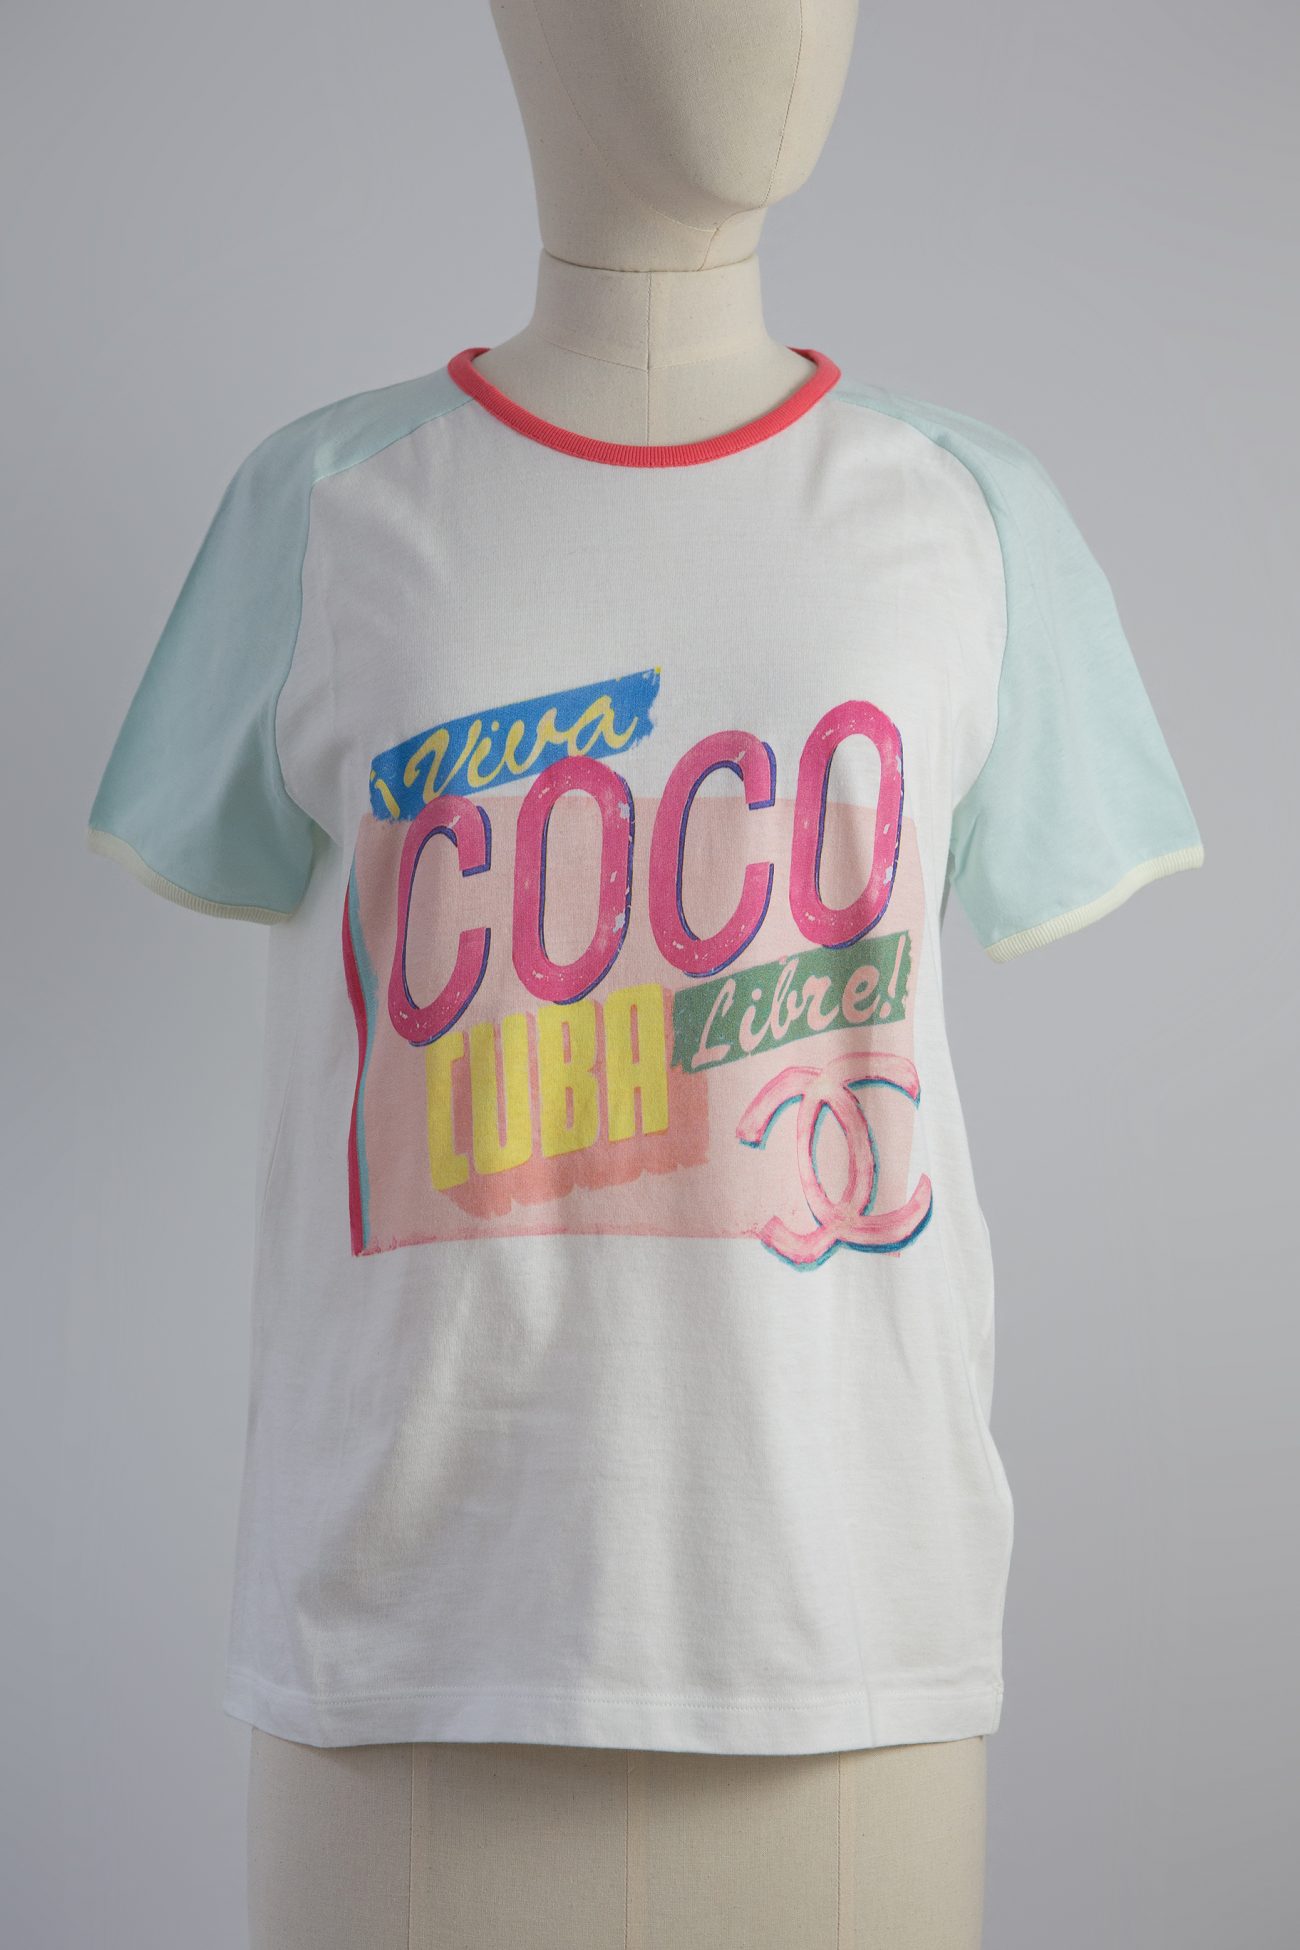 COCO'S BIRTHDAY 19 AUGUST White T-Shirt – Ironic Lux